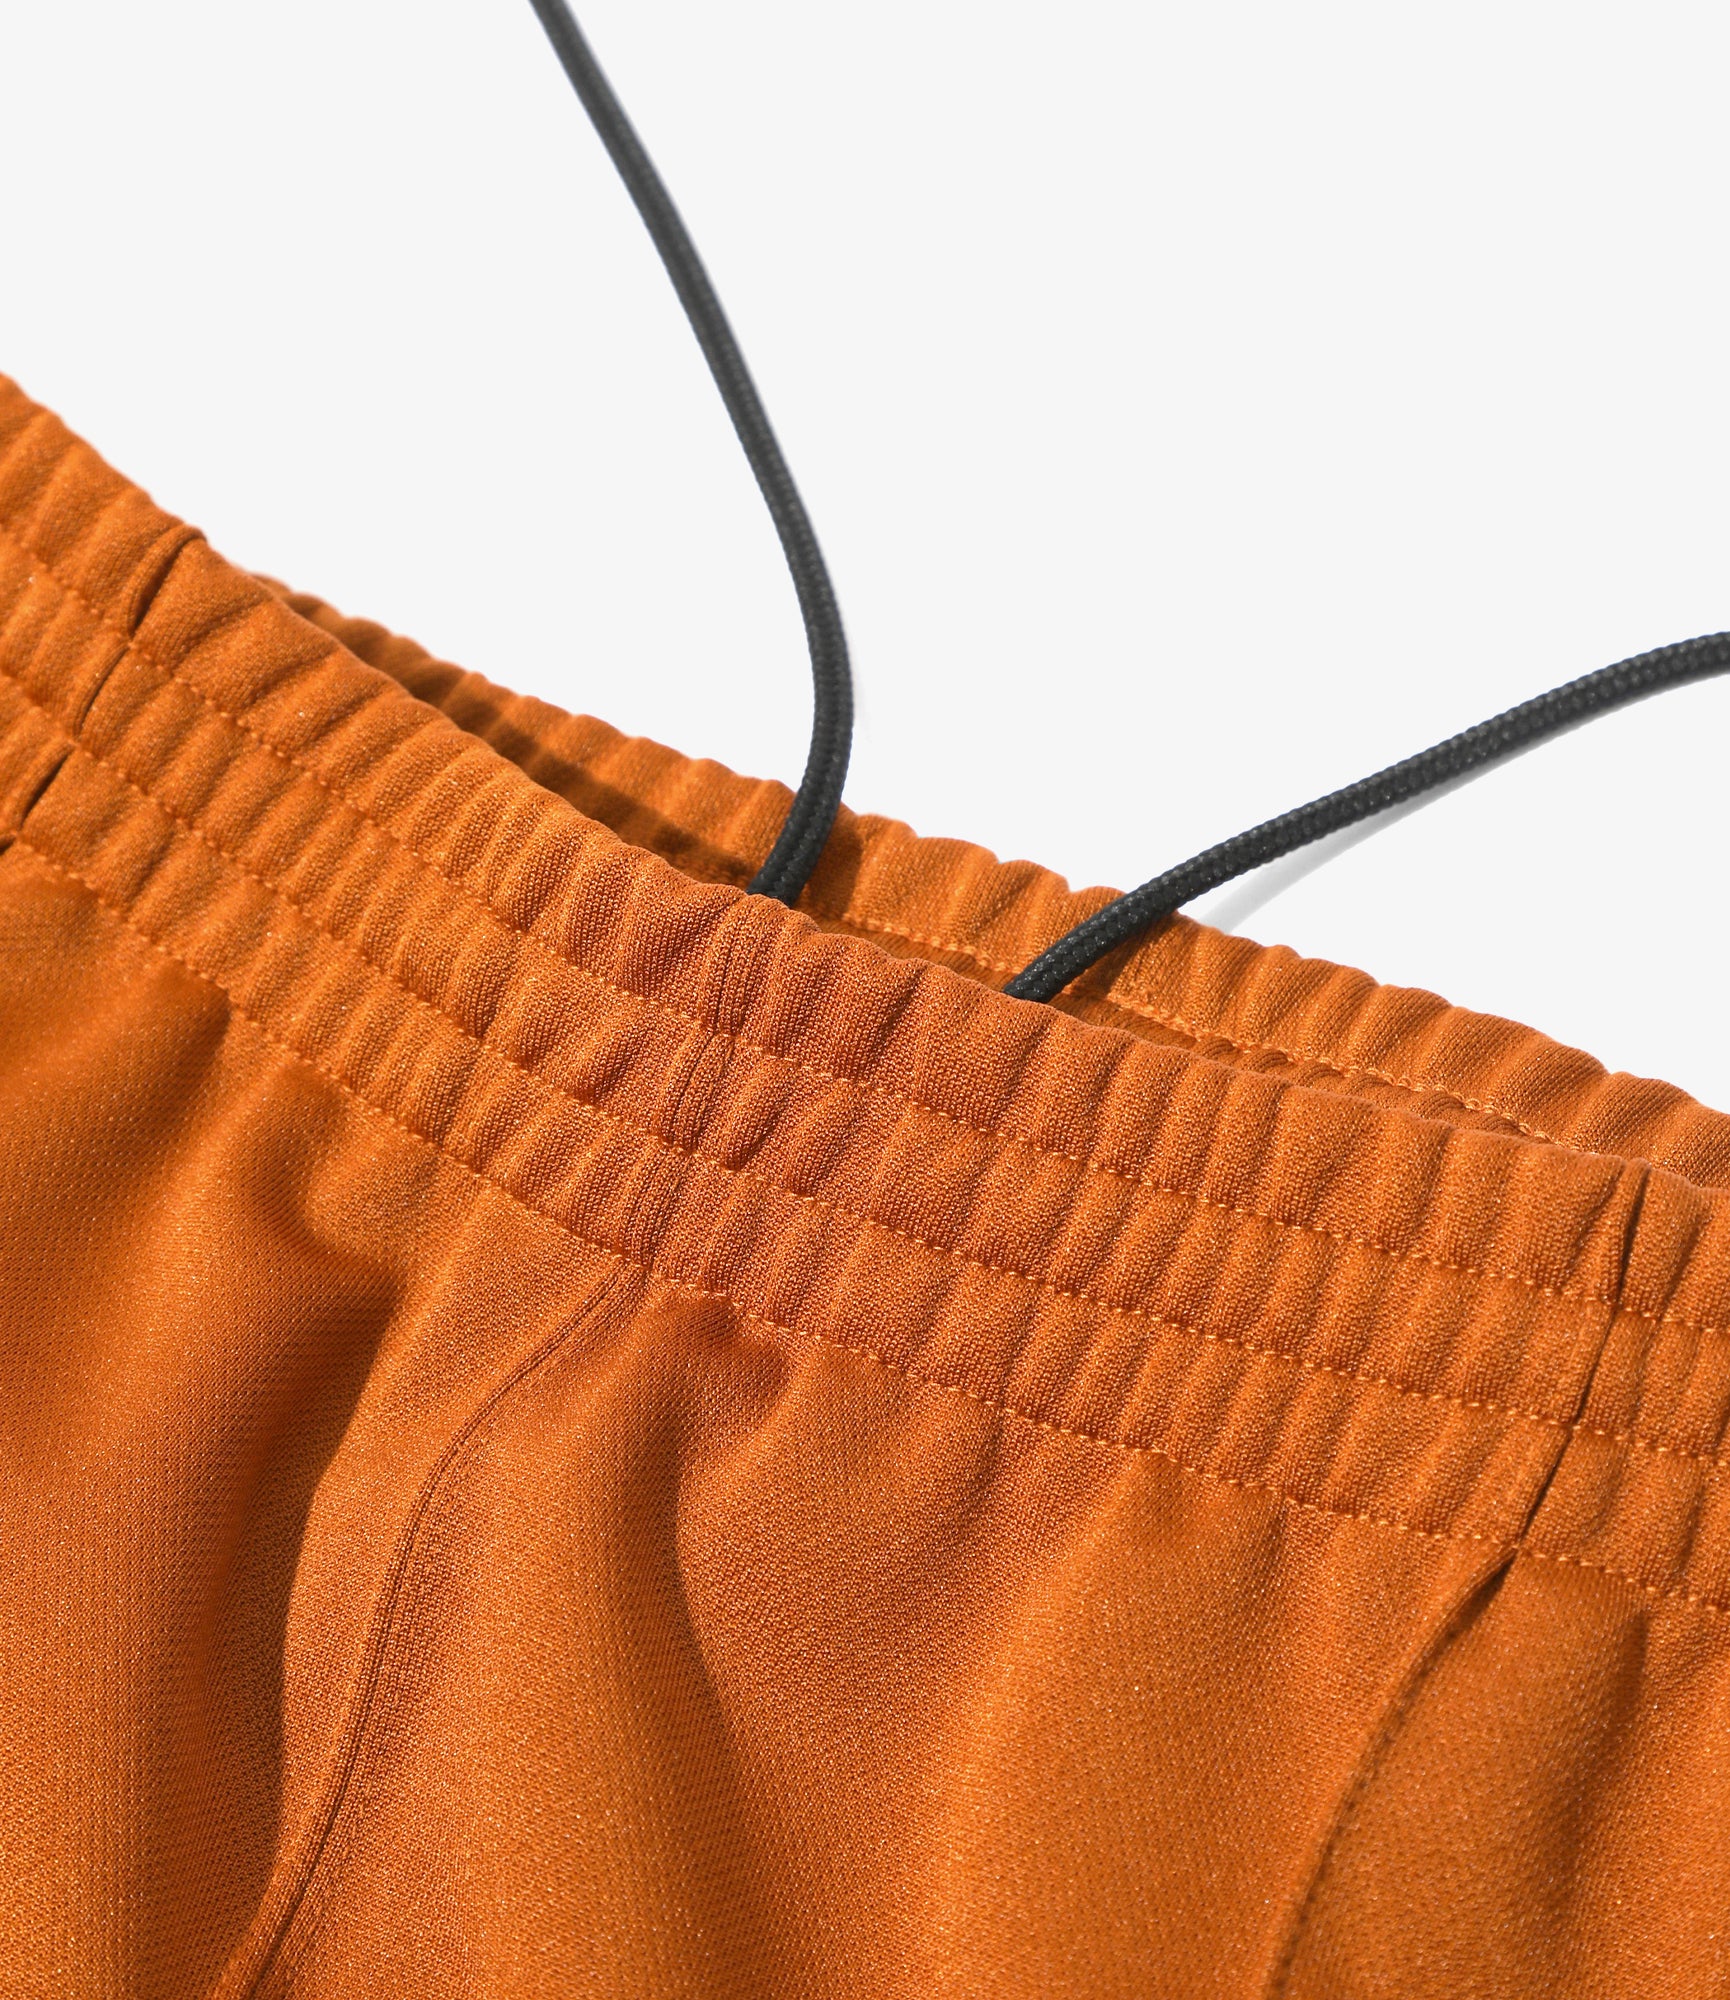 Needles Track Pant - Poly Smooth - Rust